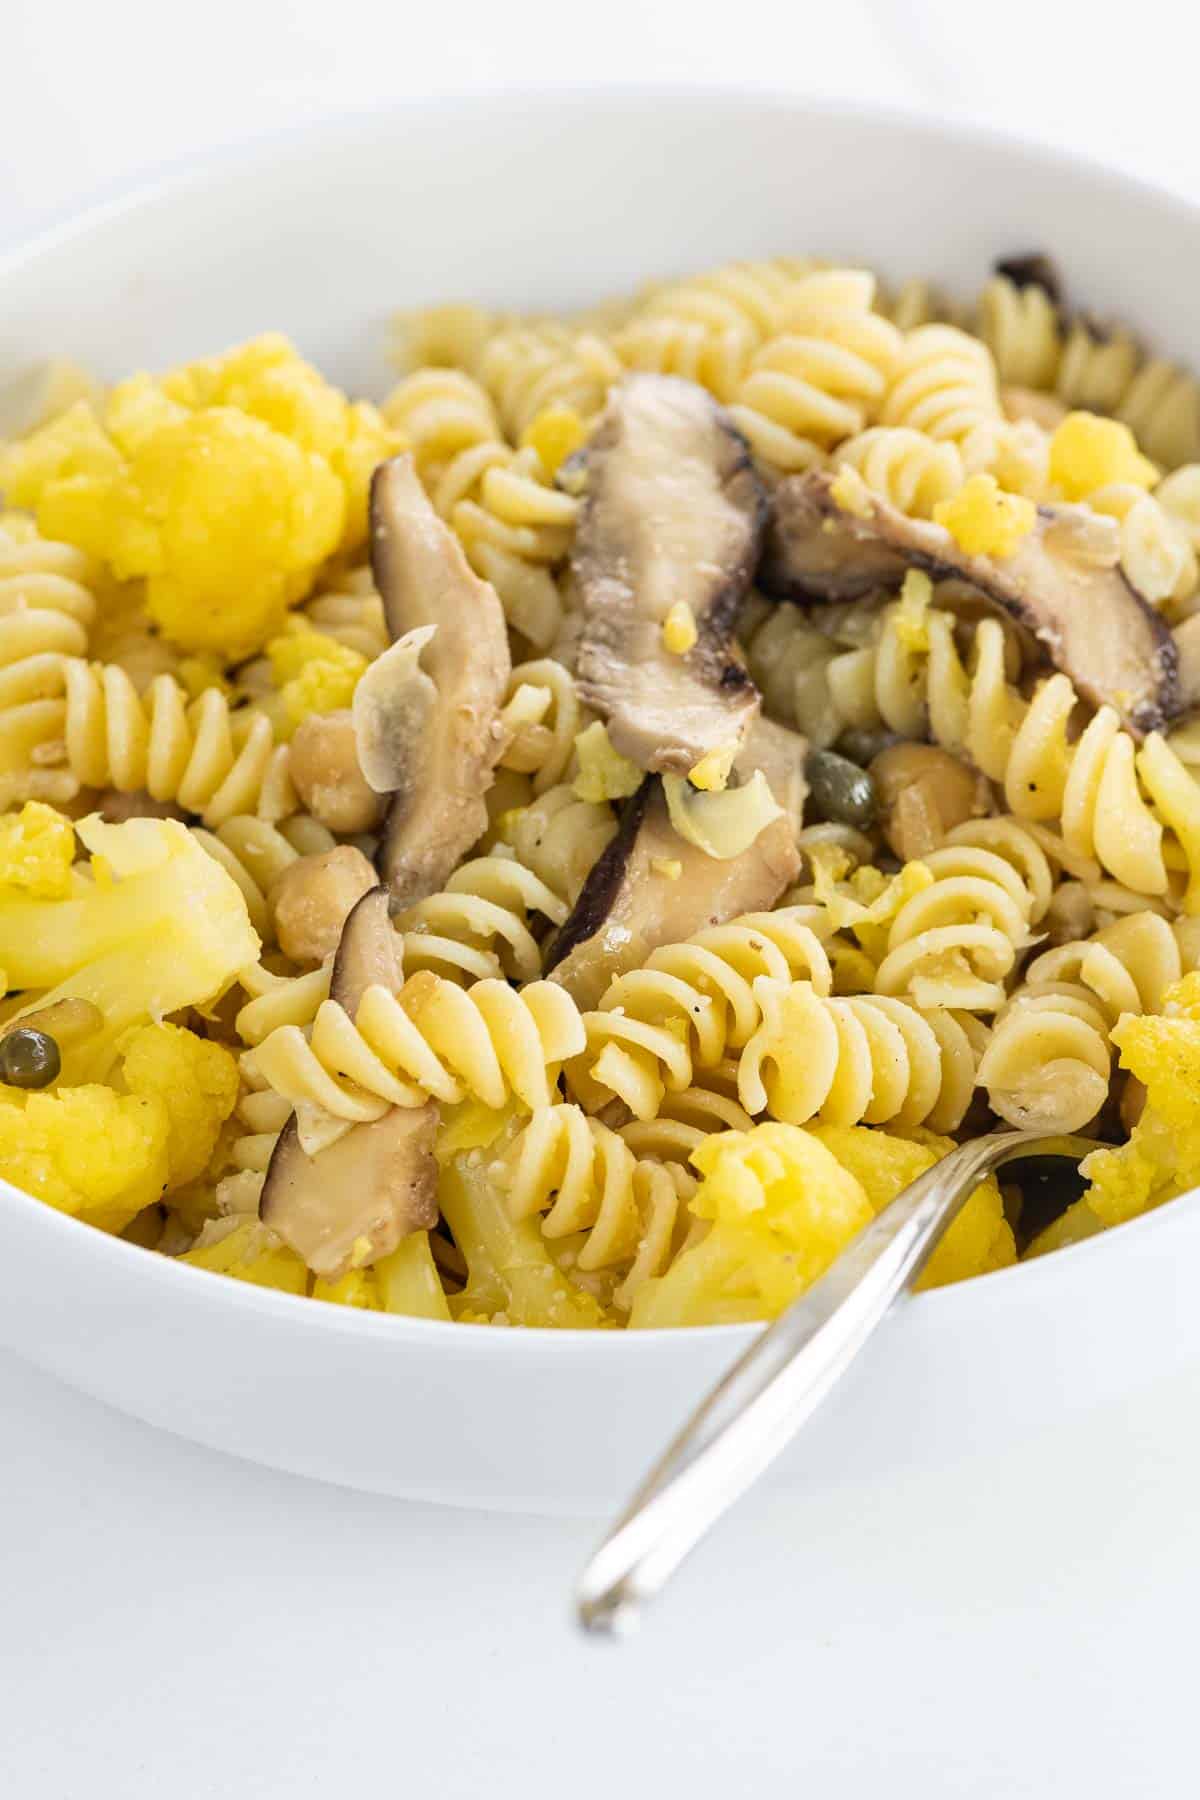 umami pasta with cauliflower, shiitakes, and chickpeas in a bowl